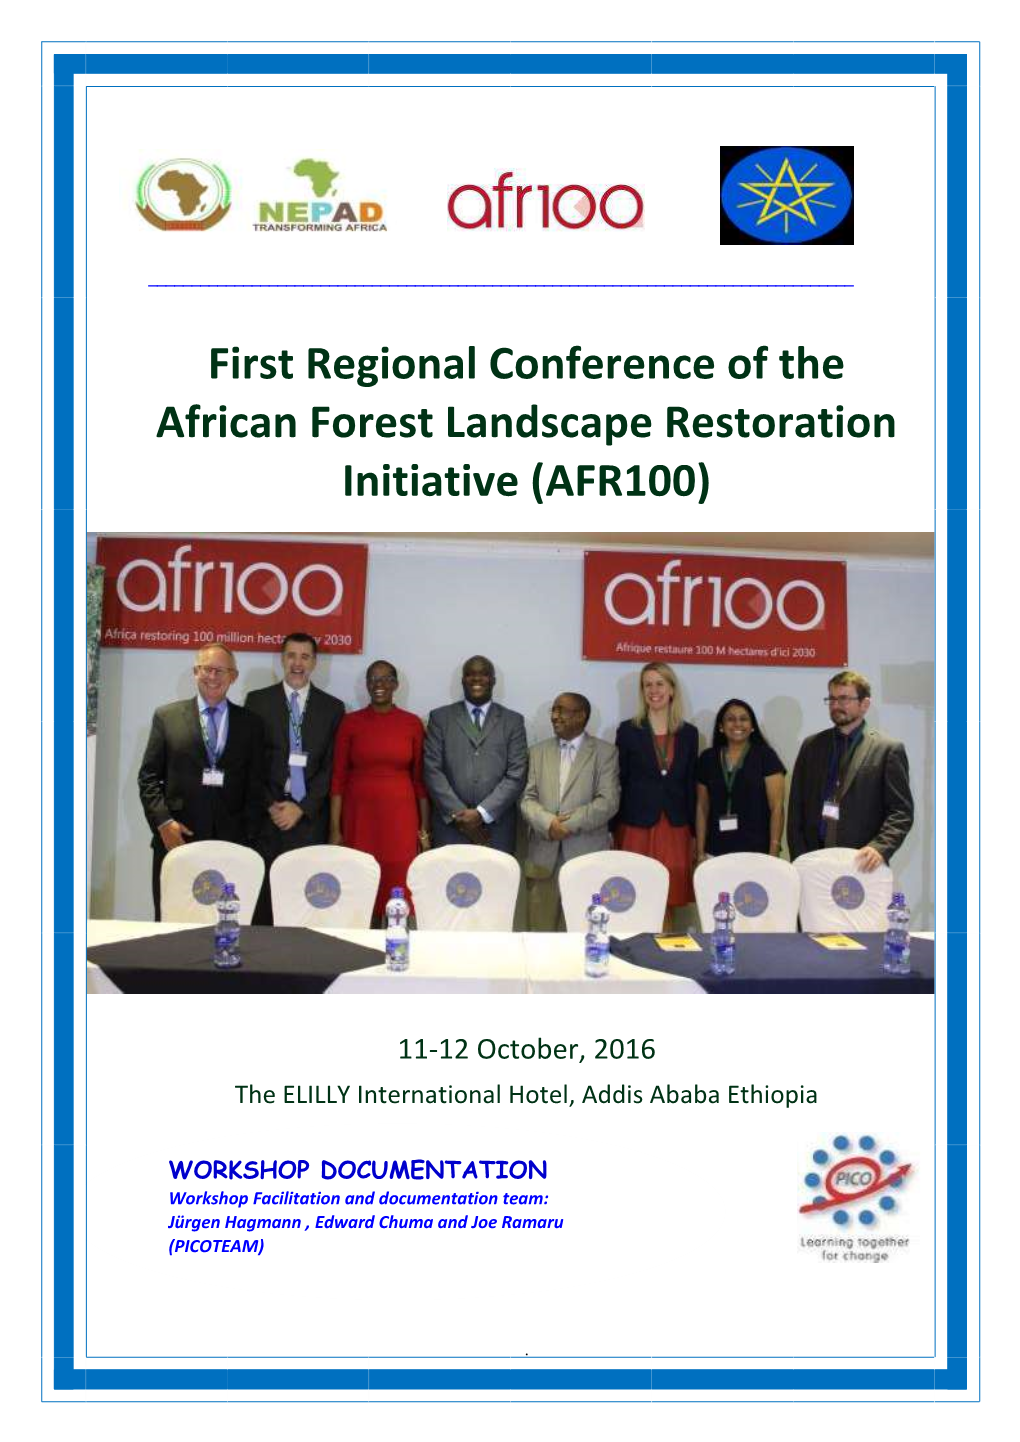 First Regional Conference of the African Forest Landscape Restoration Initiative (AFR100)